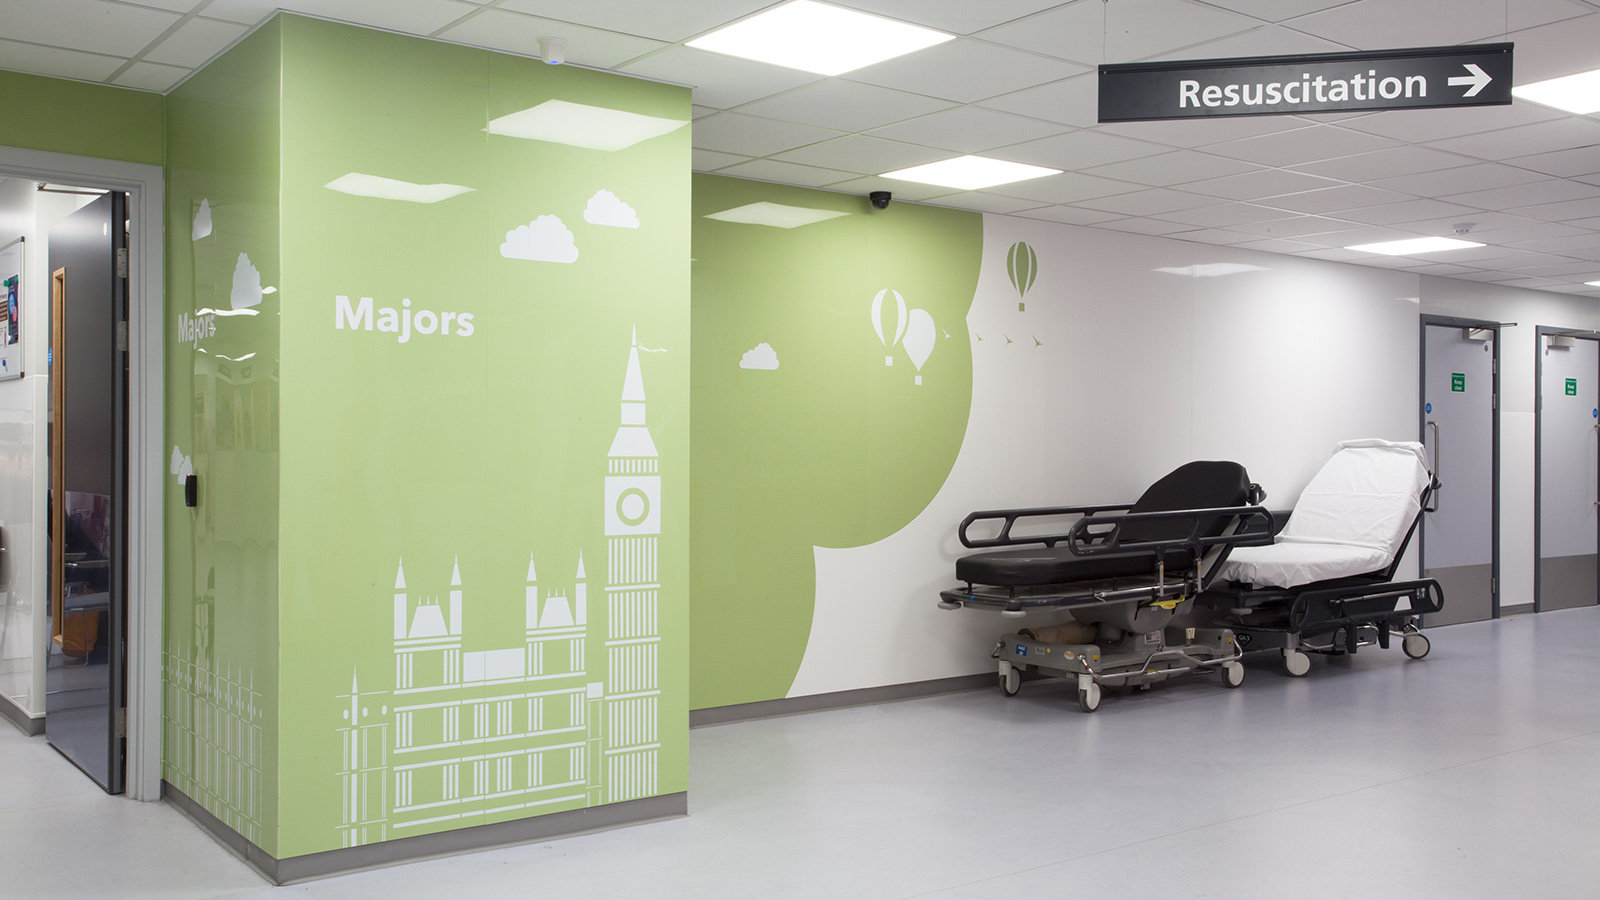 Artwork by Art in Site, installed at St Thomas’ Hospital Emergency department, featuring illustrations by illustrator Varham Muratyan. Image credit: Art in Site